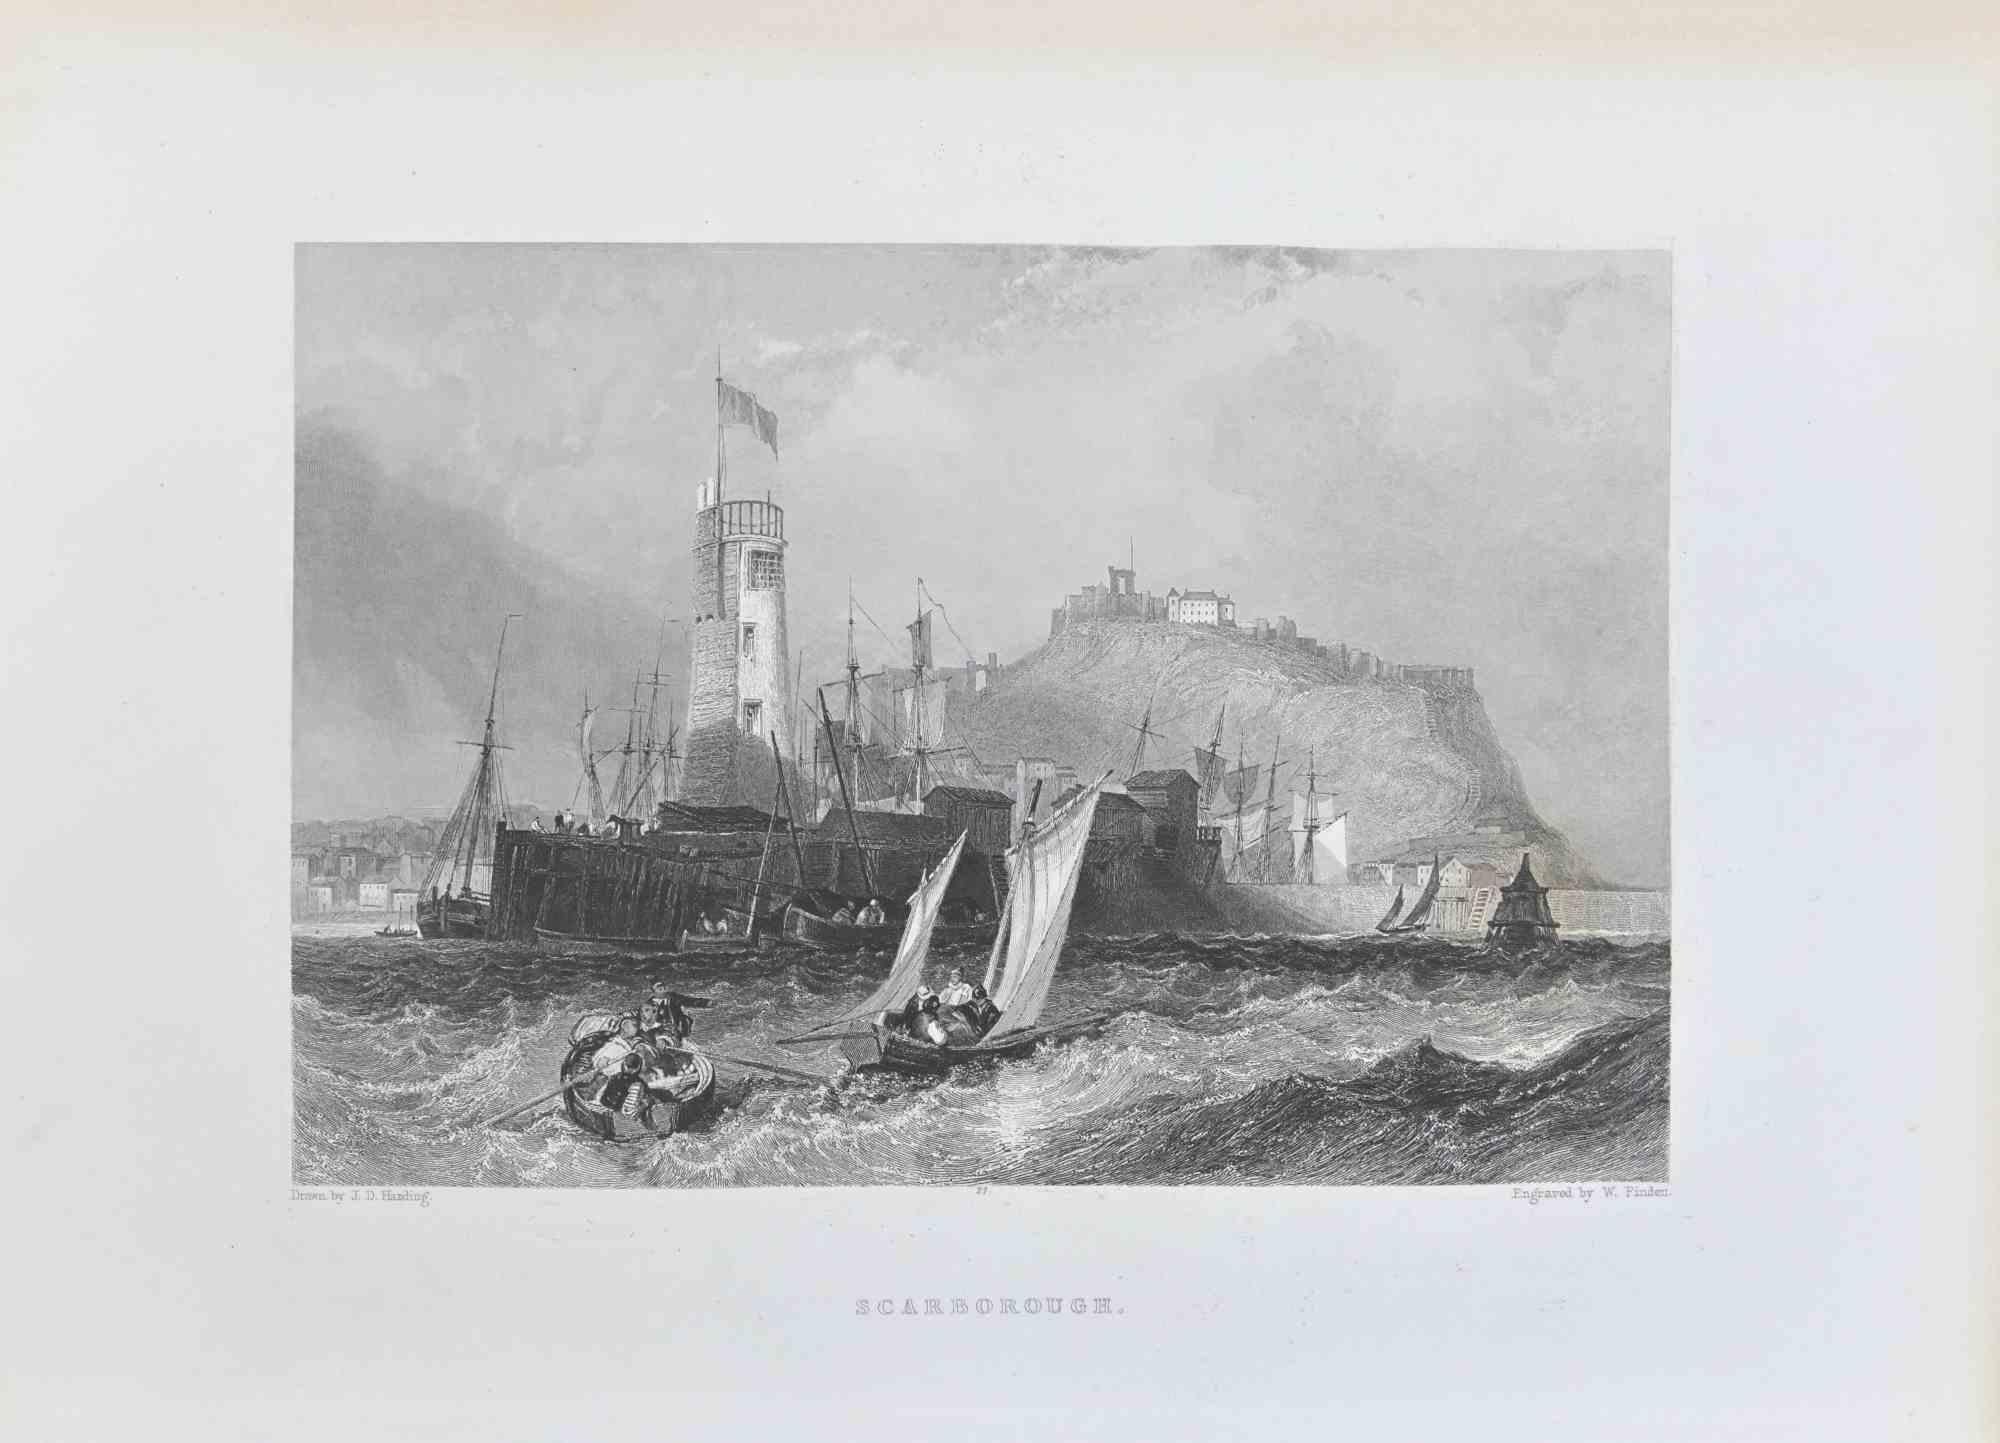 Scarborough is a lithograph on paper realized by the artist James Duffield Harding.

Signed on the plate on the lower left. Titled on the lower center. Engraved by W. Finden

The state of preservation is good, only a yellowed paper along the